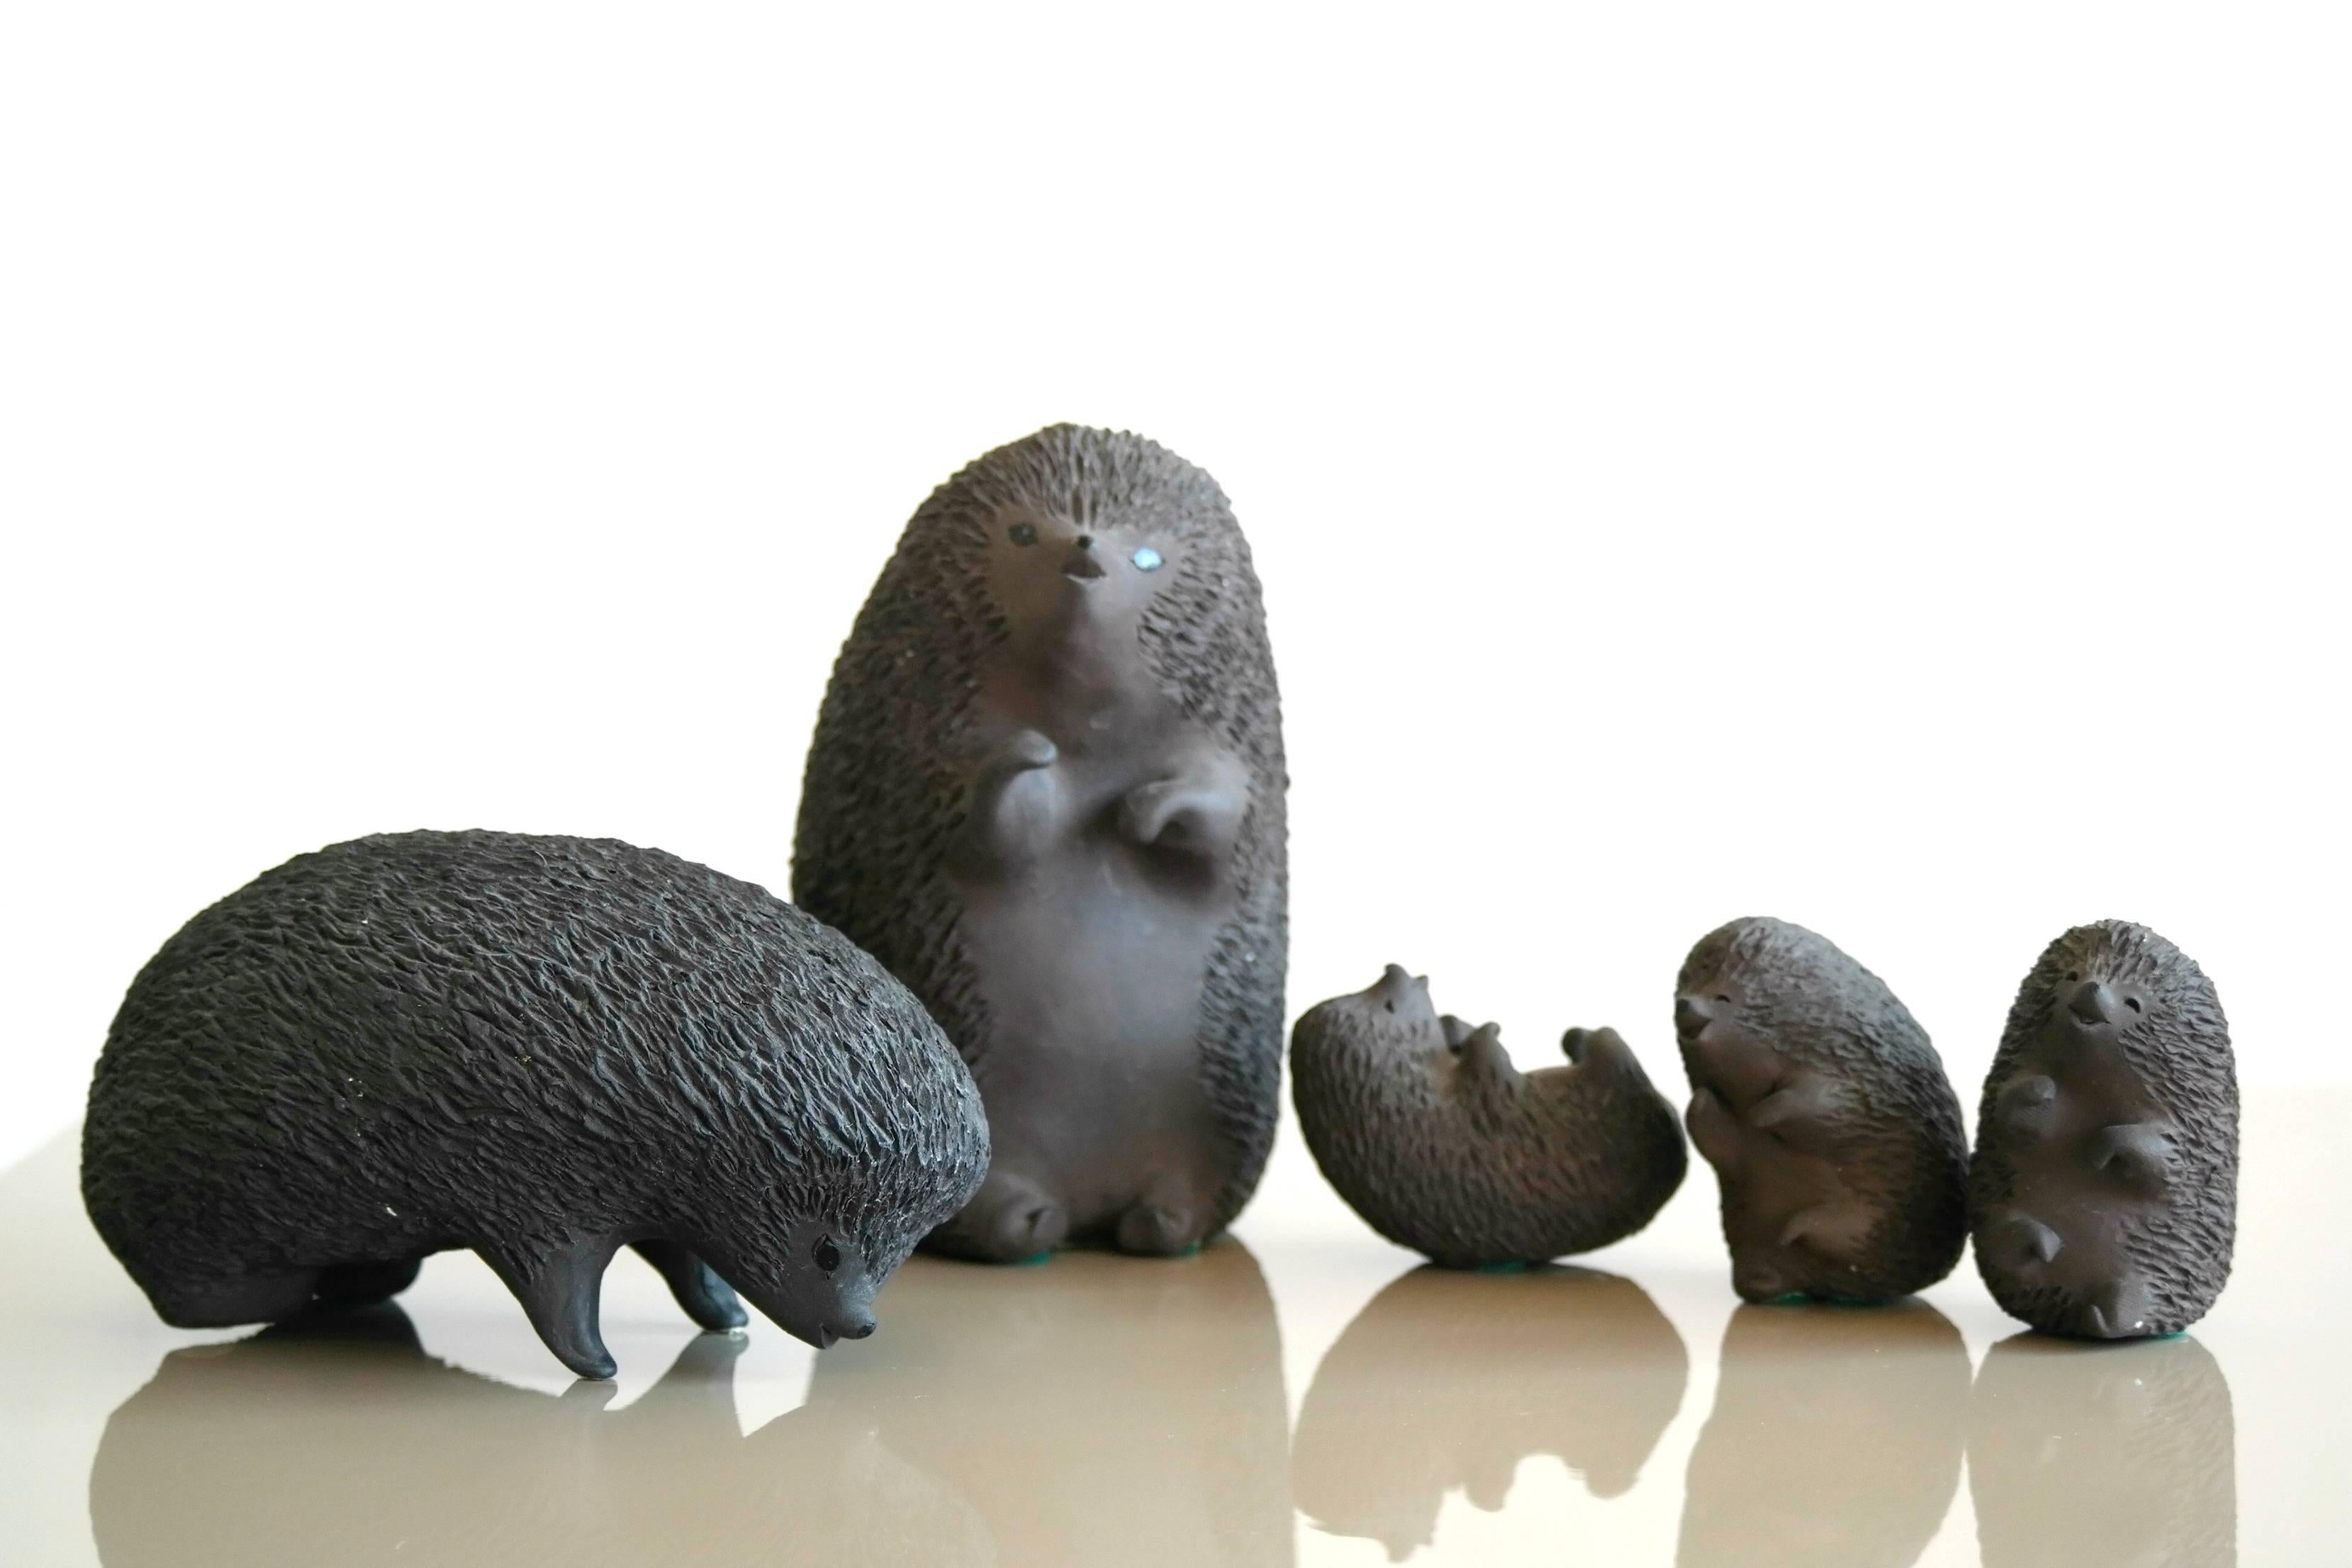 Family of five super cute hedgehogs designed by Ellen Karlsen for Kahler keramik of Denmark in the 1960s. Beautiful detailing. Very sought after.